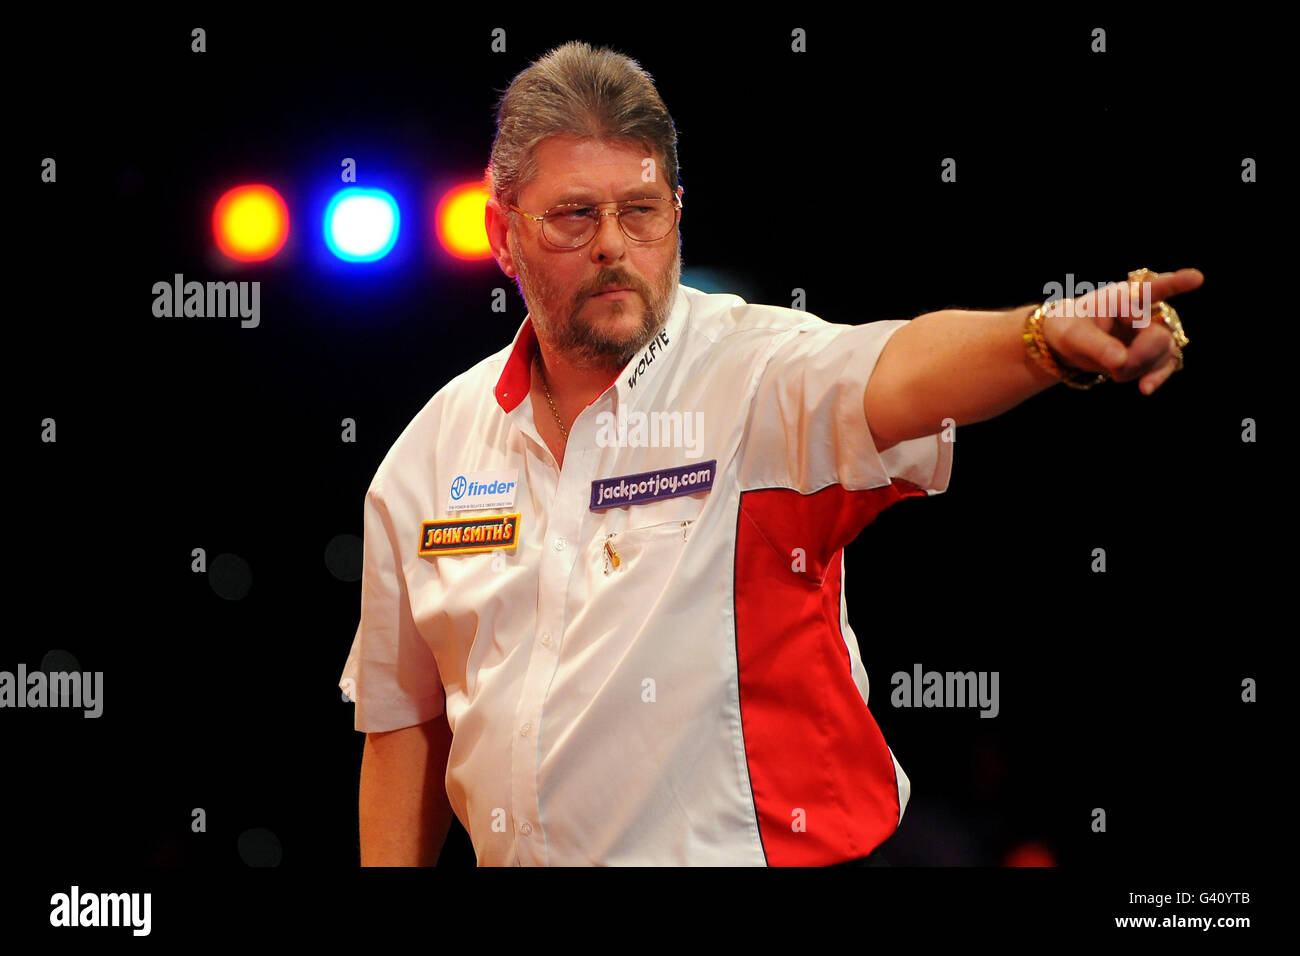 England's Martin Adams celebrates during his match against England's Dean Winstanley during the BDO World Professional Darts Championship at the Lakeside Complex, Surrey. Stock Photo